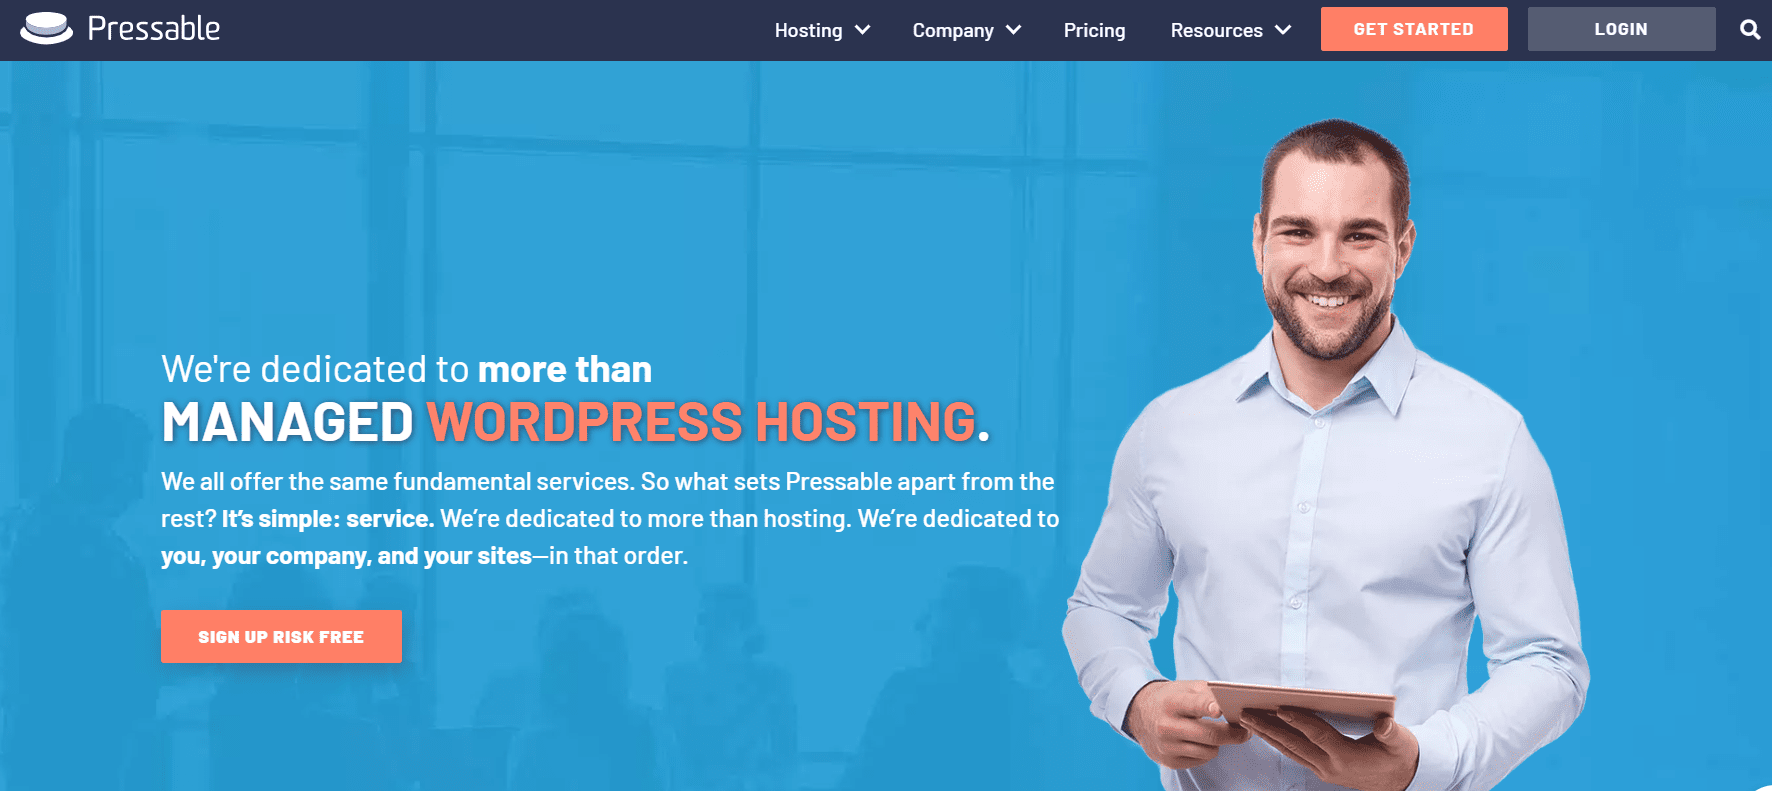 Managed WordPress Hosting from Pressable